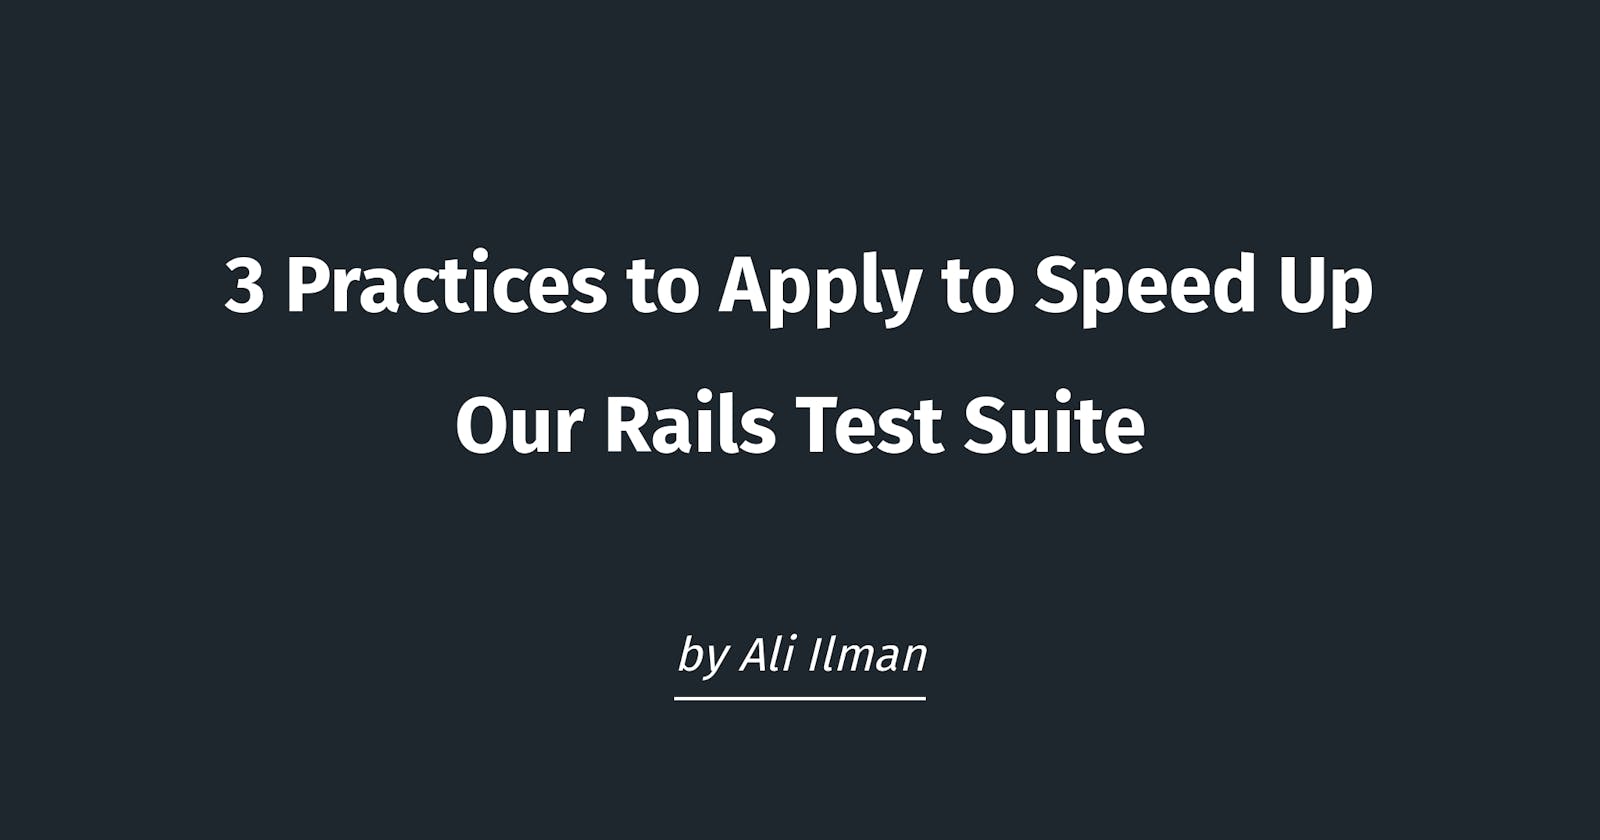 3 Practices to Apply to Speed Up Our Rails Test Suite